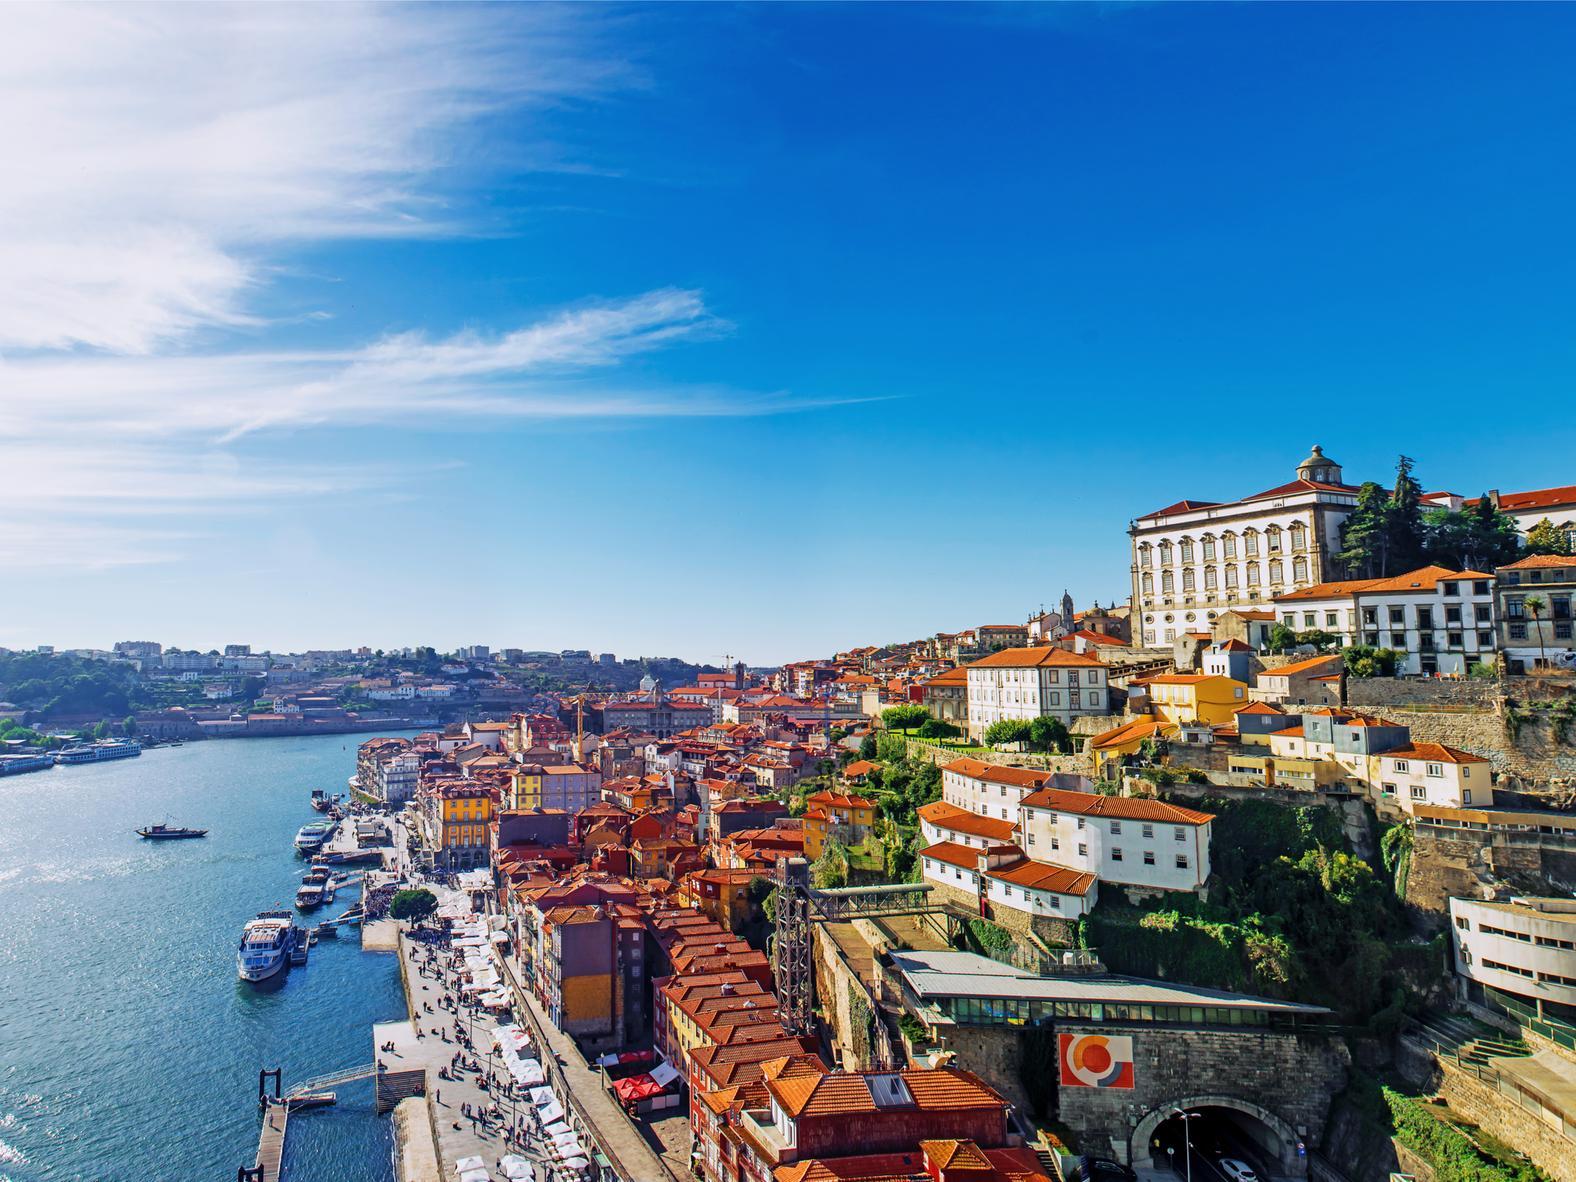 Portugal is a great destination to visit in April, with sunny, clear skies and a warm climate. The temperature reaches a peak of around 19C, providing the perfect place to soak up the sun over Easter.